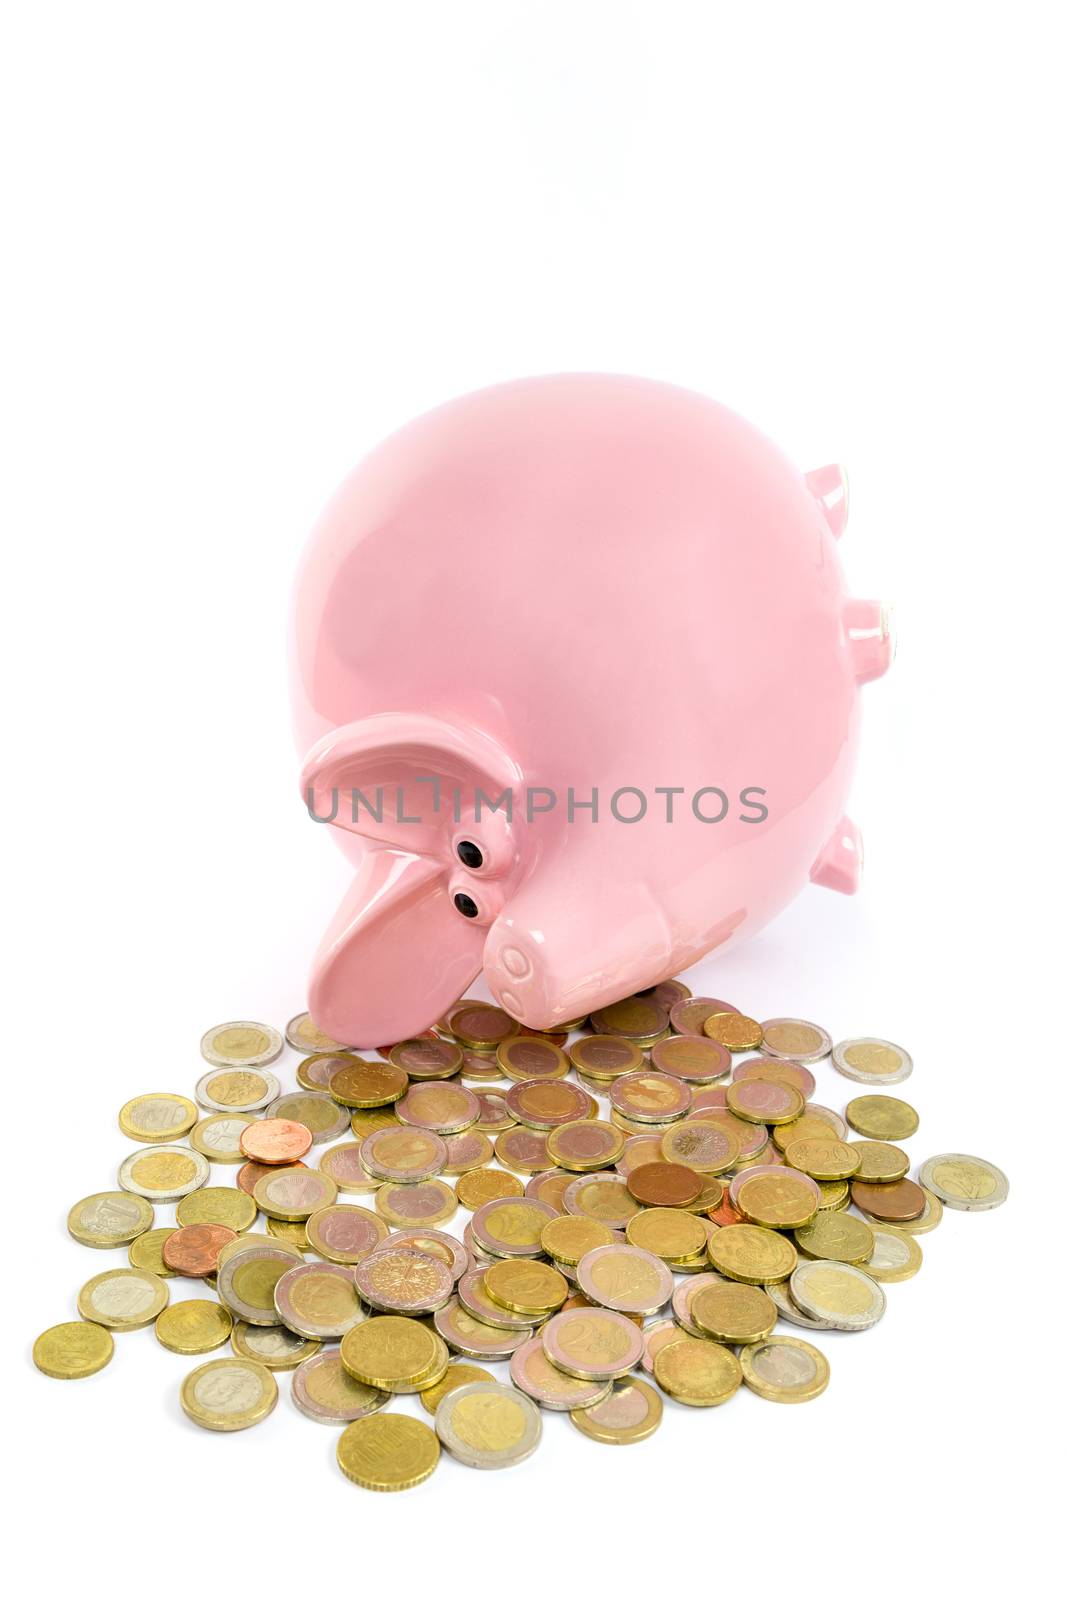 Lying pink piggy bank with pile of euro coins  by BenSchonewille